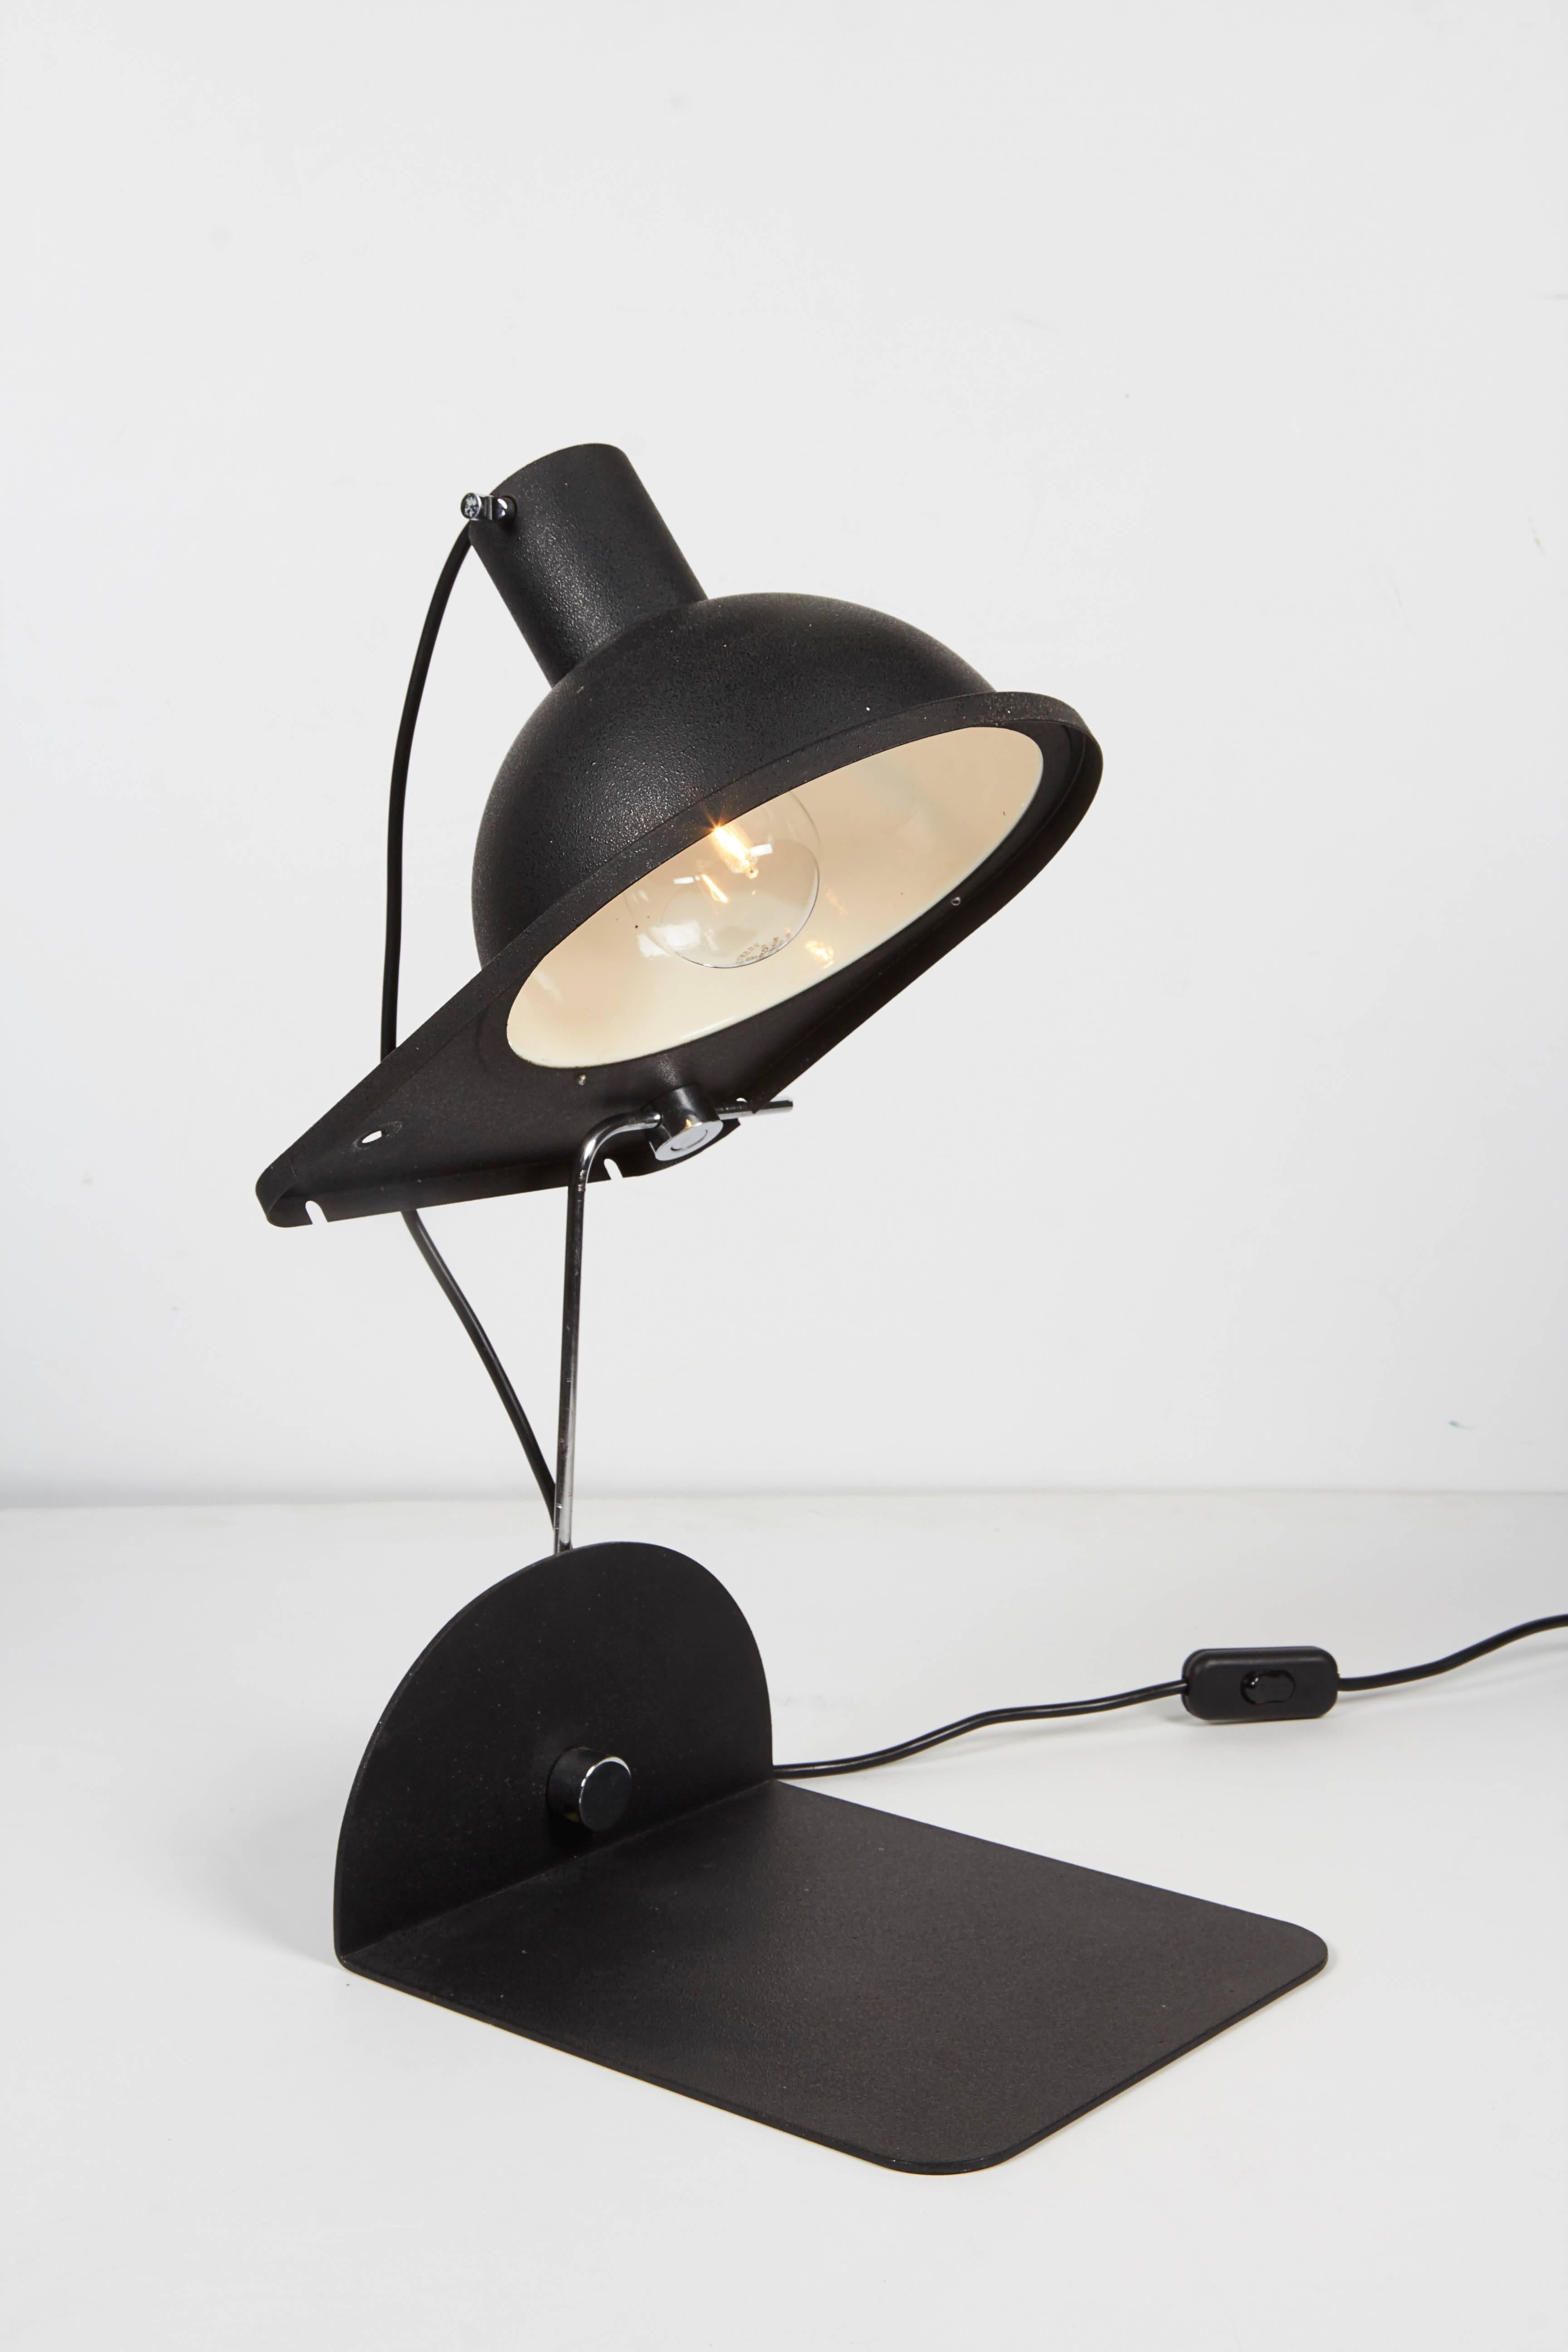 1970 Black Satin Italian Table Lamp by Luci Design Grignani In Good Condition For Sale In New York, NY